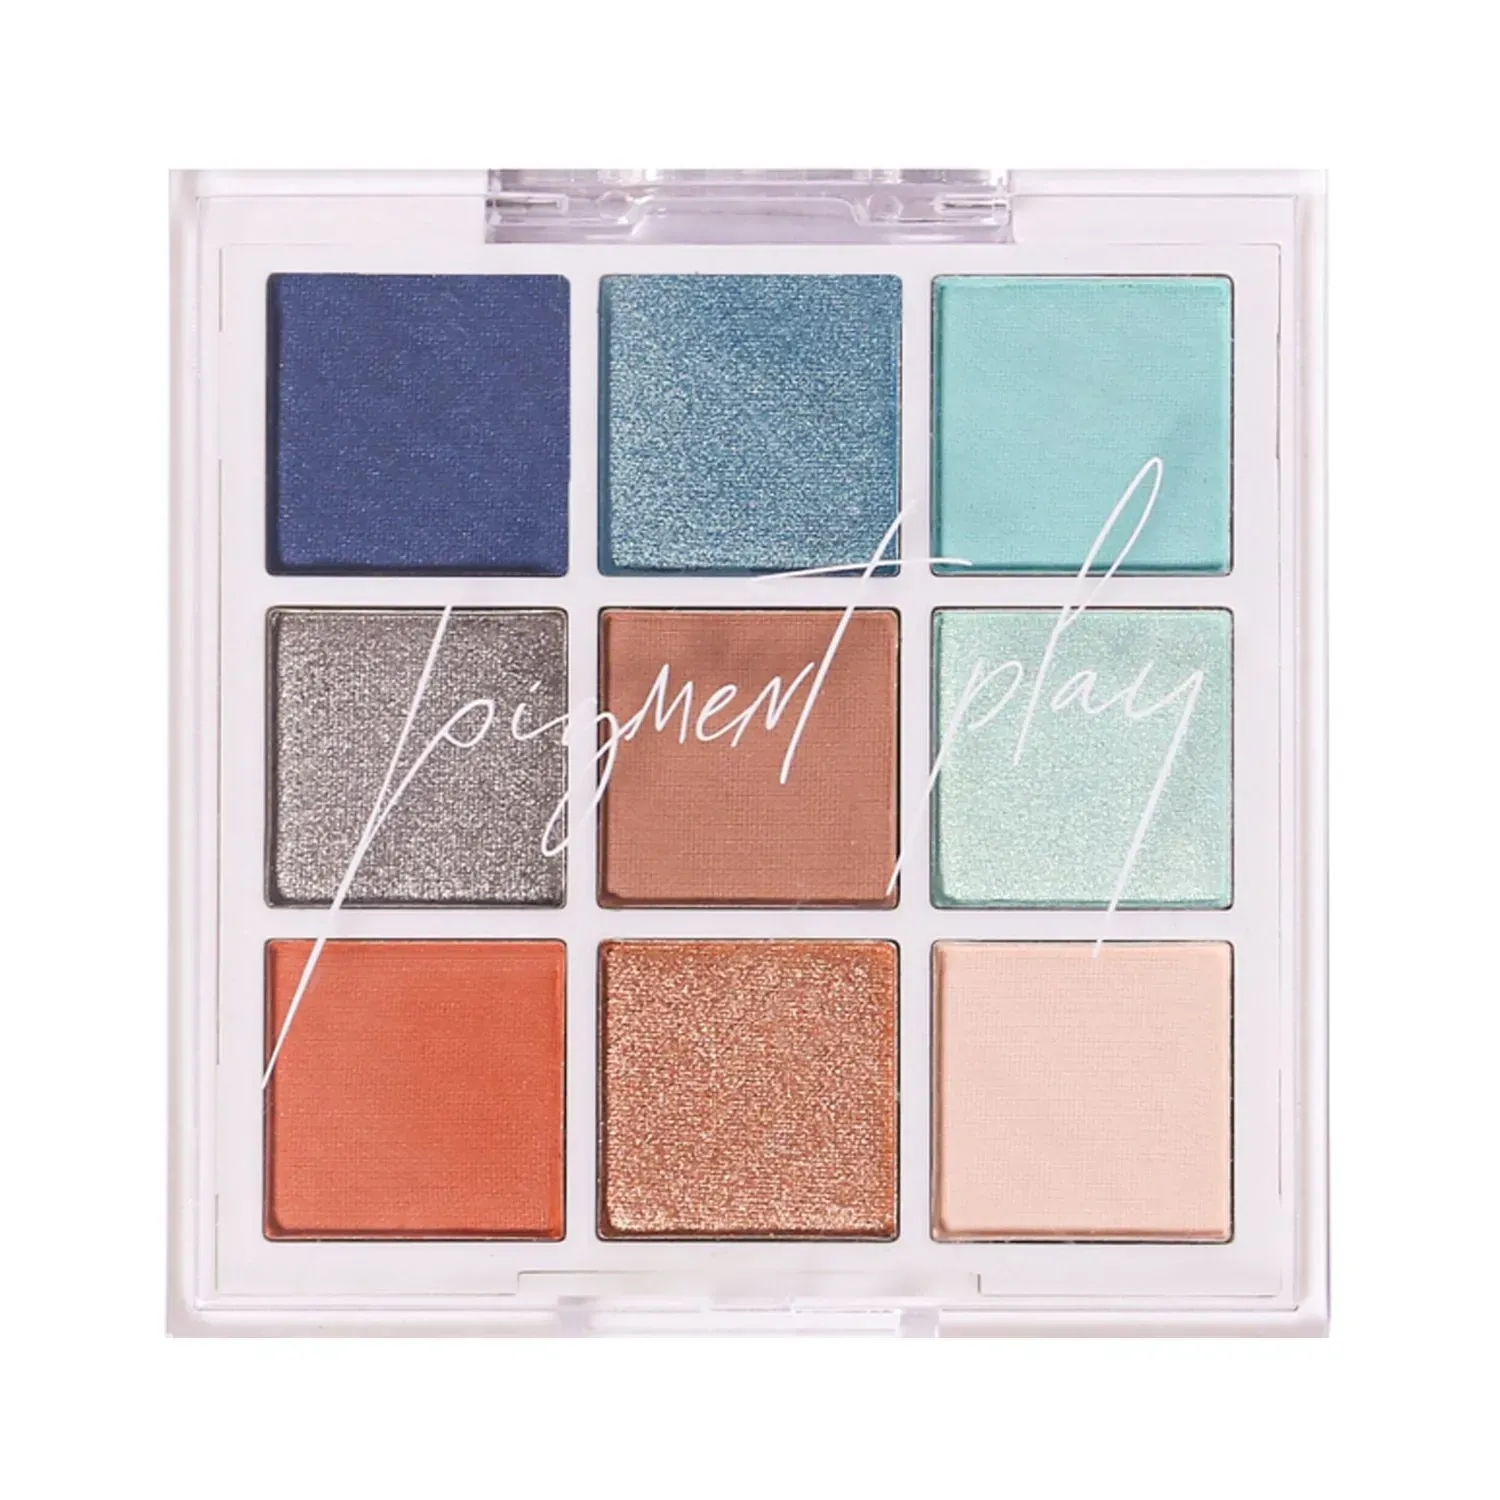 Pigment Play | Pigment Play Playground Hero Shadow Palette - Marine Clouds (9g)